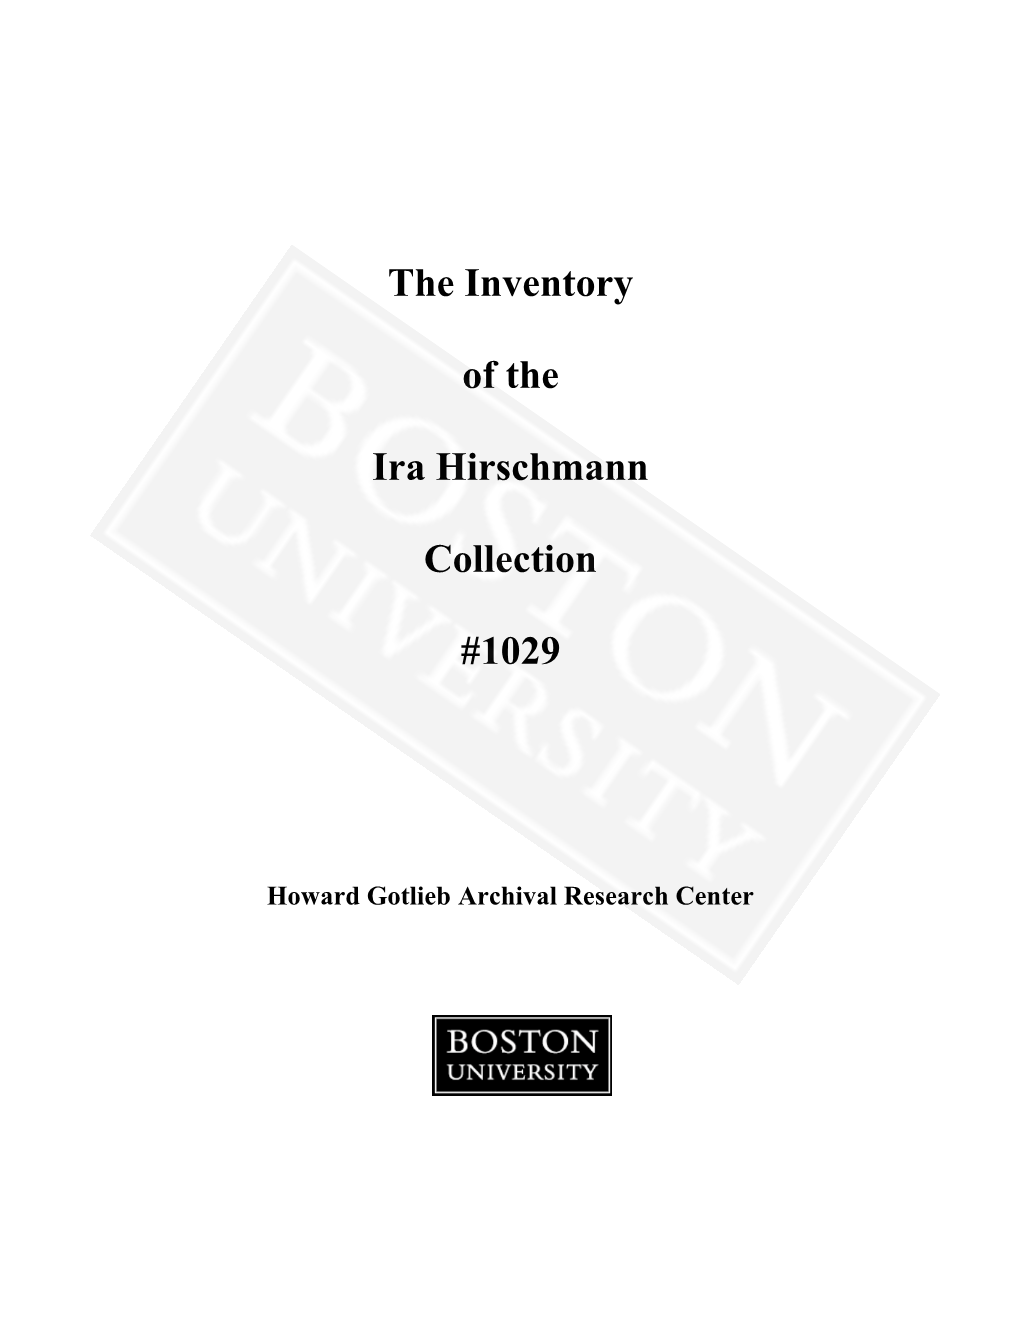 The Inventory of the Ira Hirschmann Collection #1029